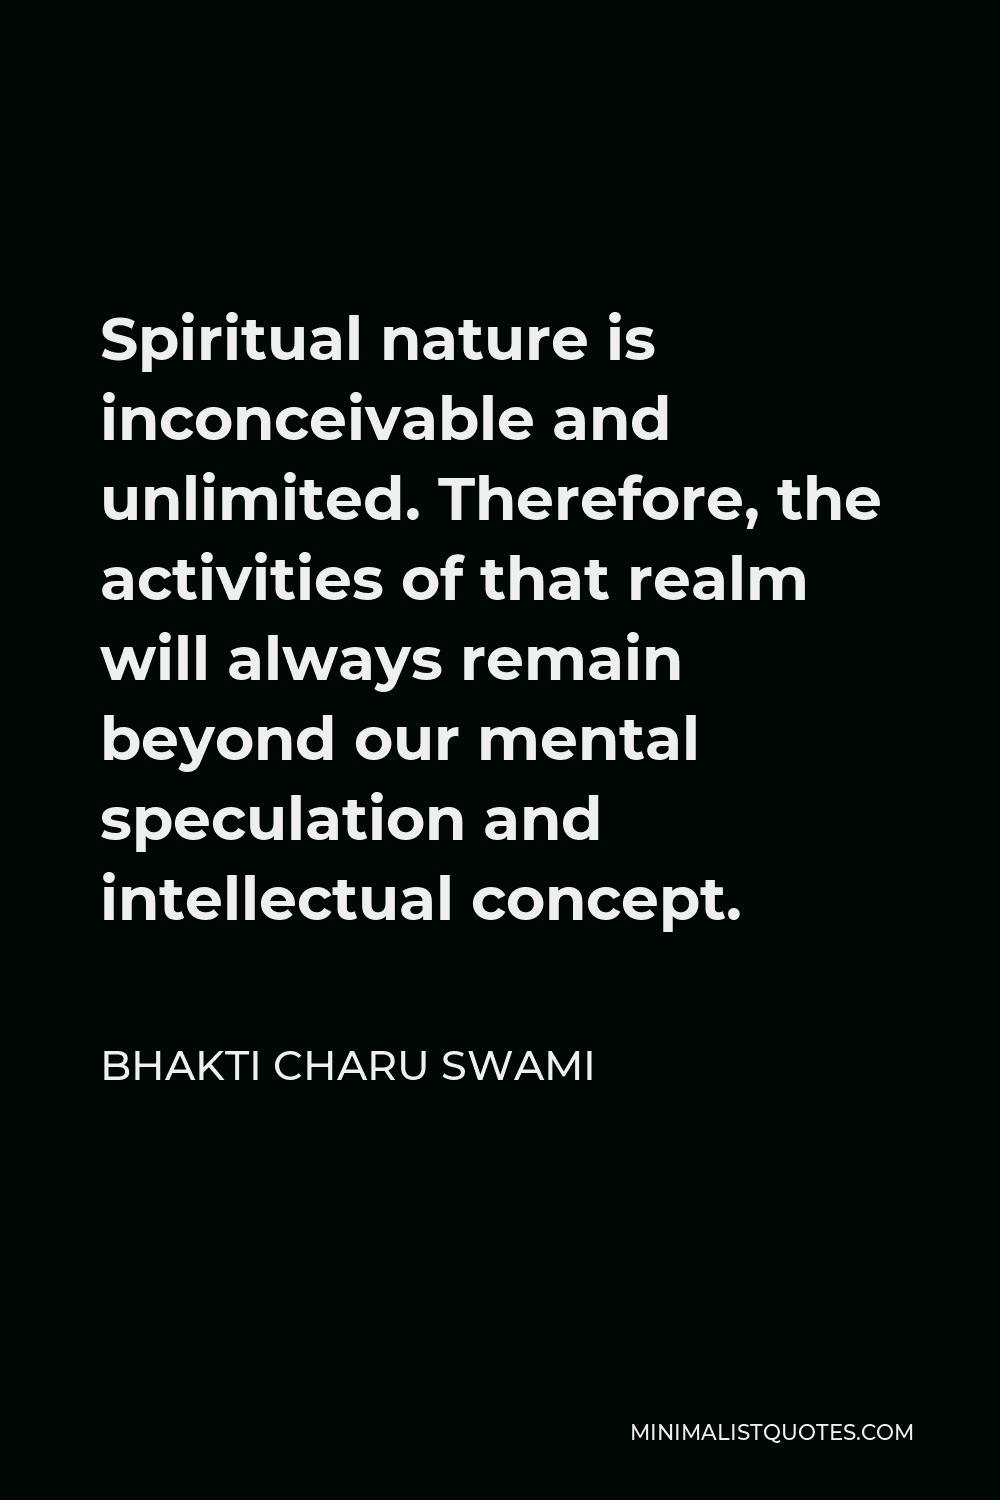 Bhakti Charu Swami Quote - Spiritual nature is inconceivable and unlimited. Therefore, the activities of that realm will always remain beyond our mental speculation and intellectual concept.